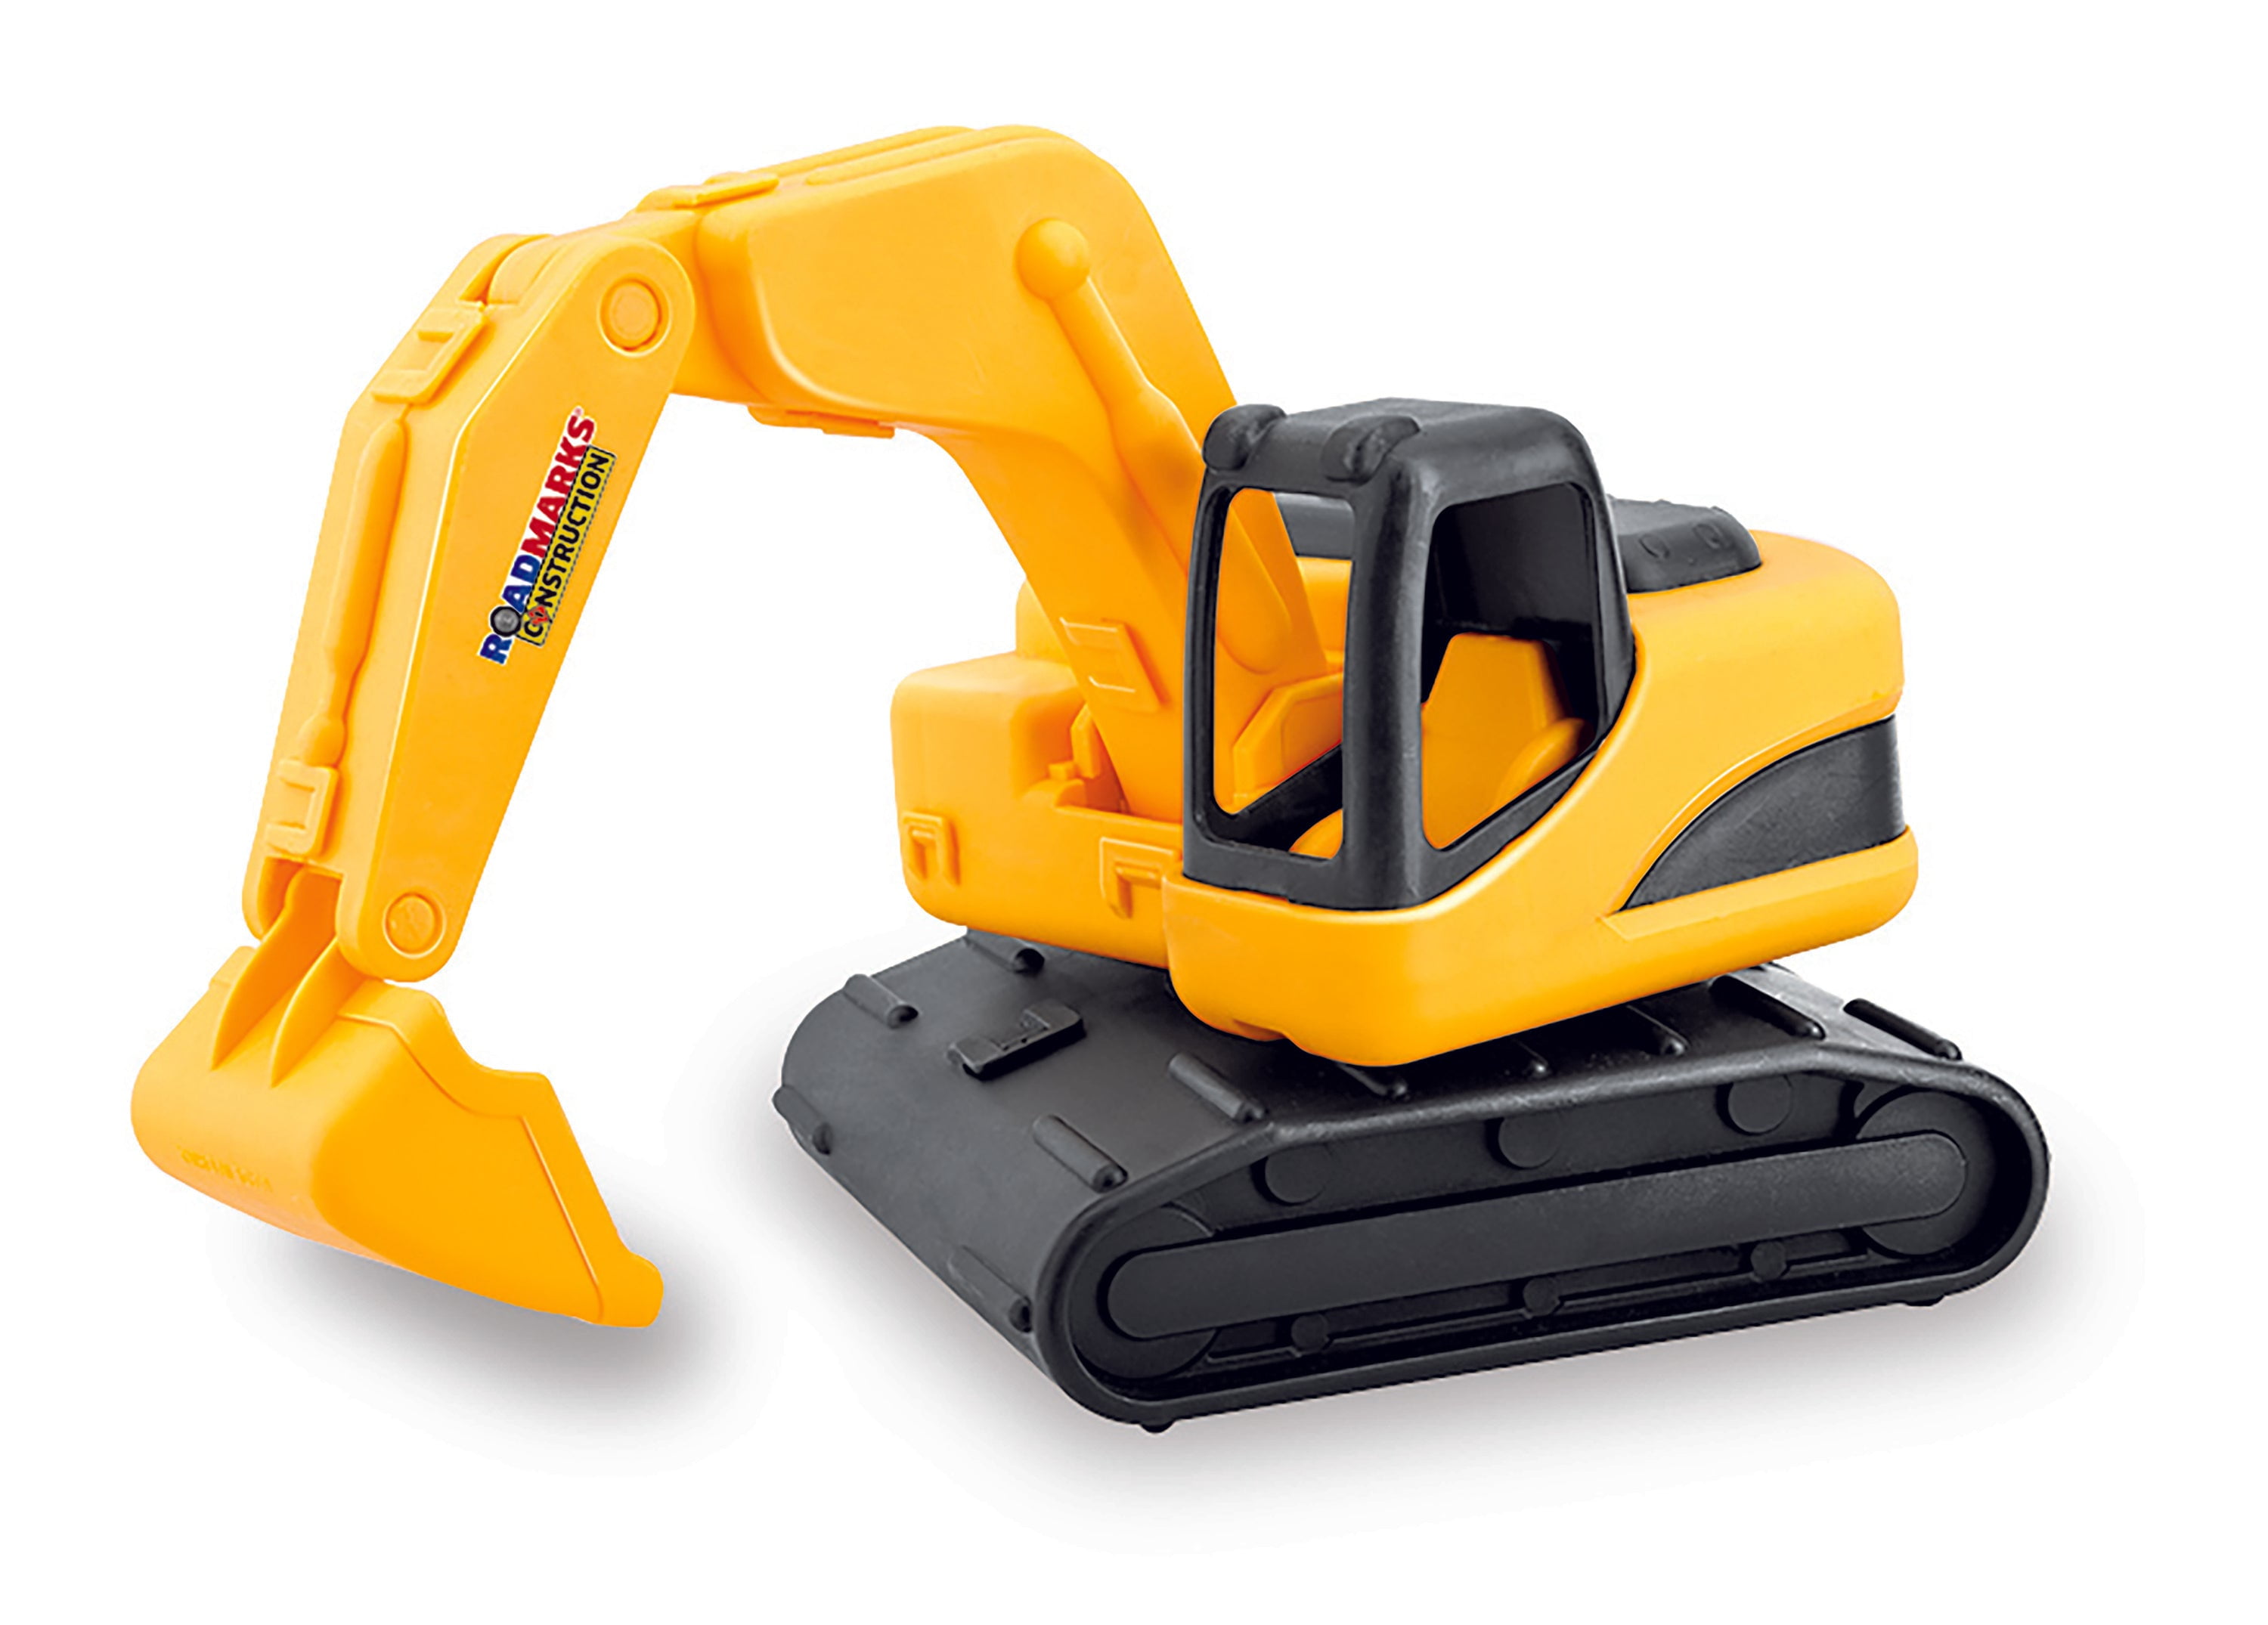 Picture of Road Marks RM5000 Plastic Construction Excavator Toy